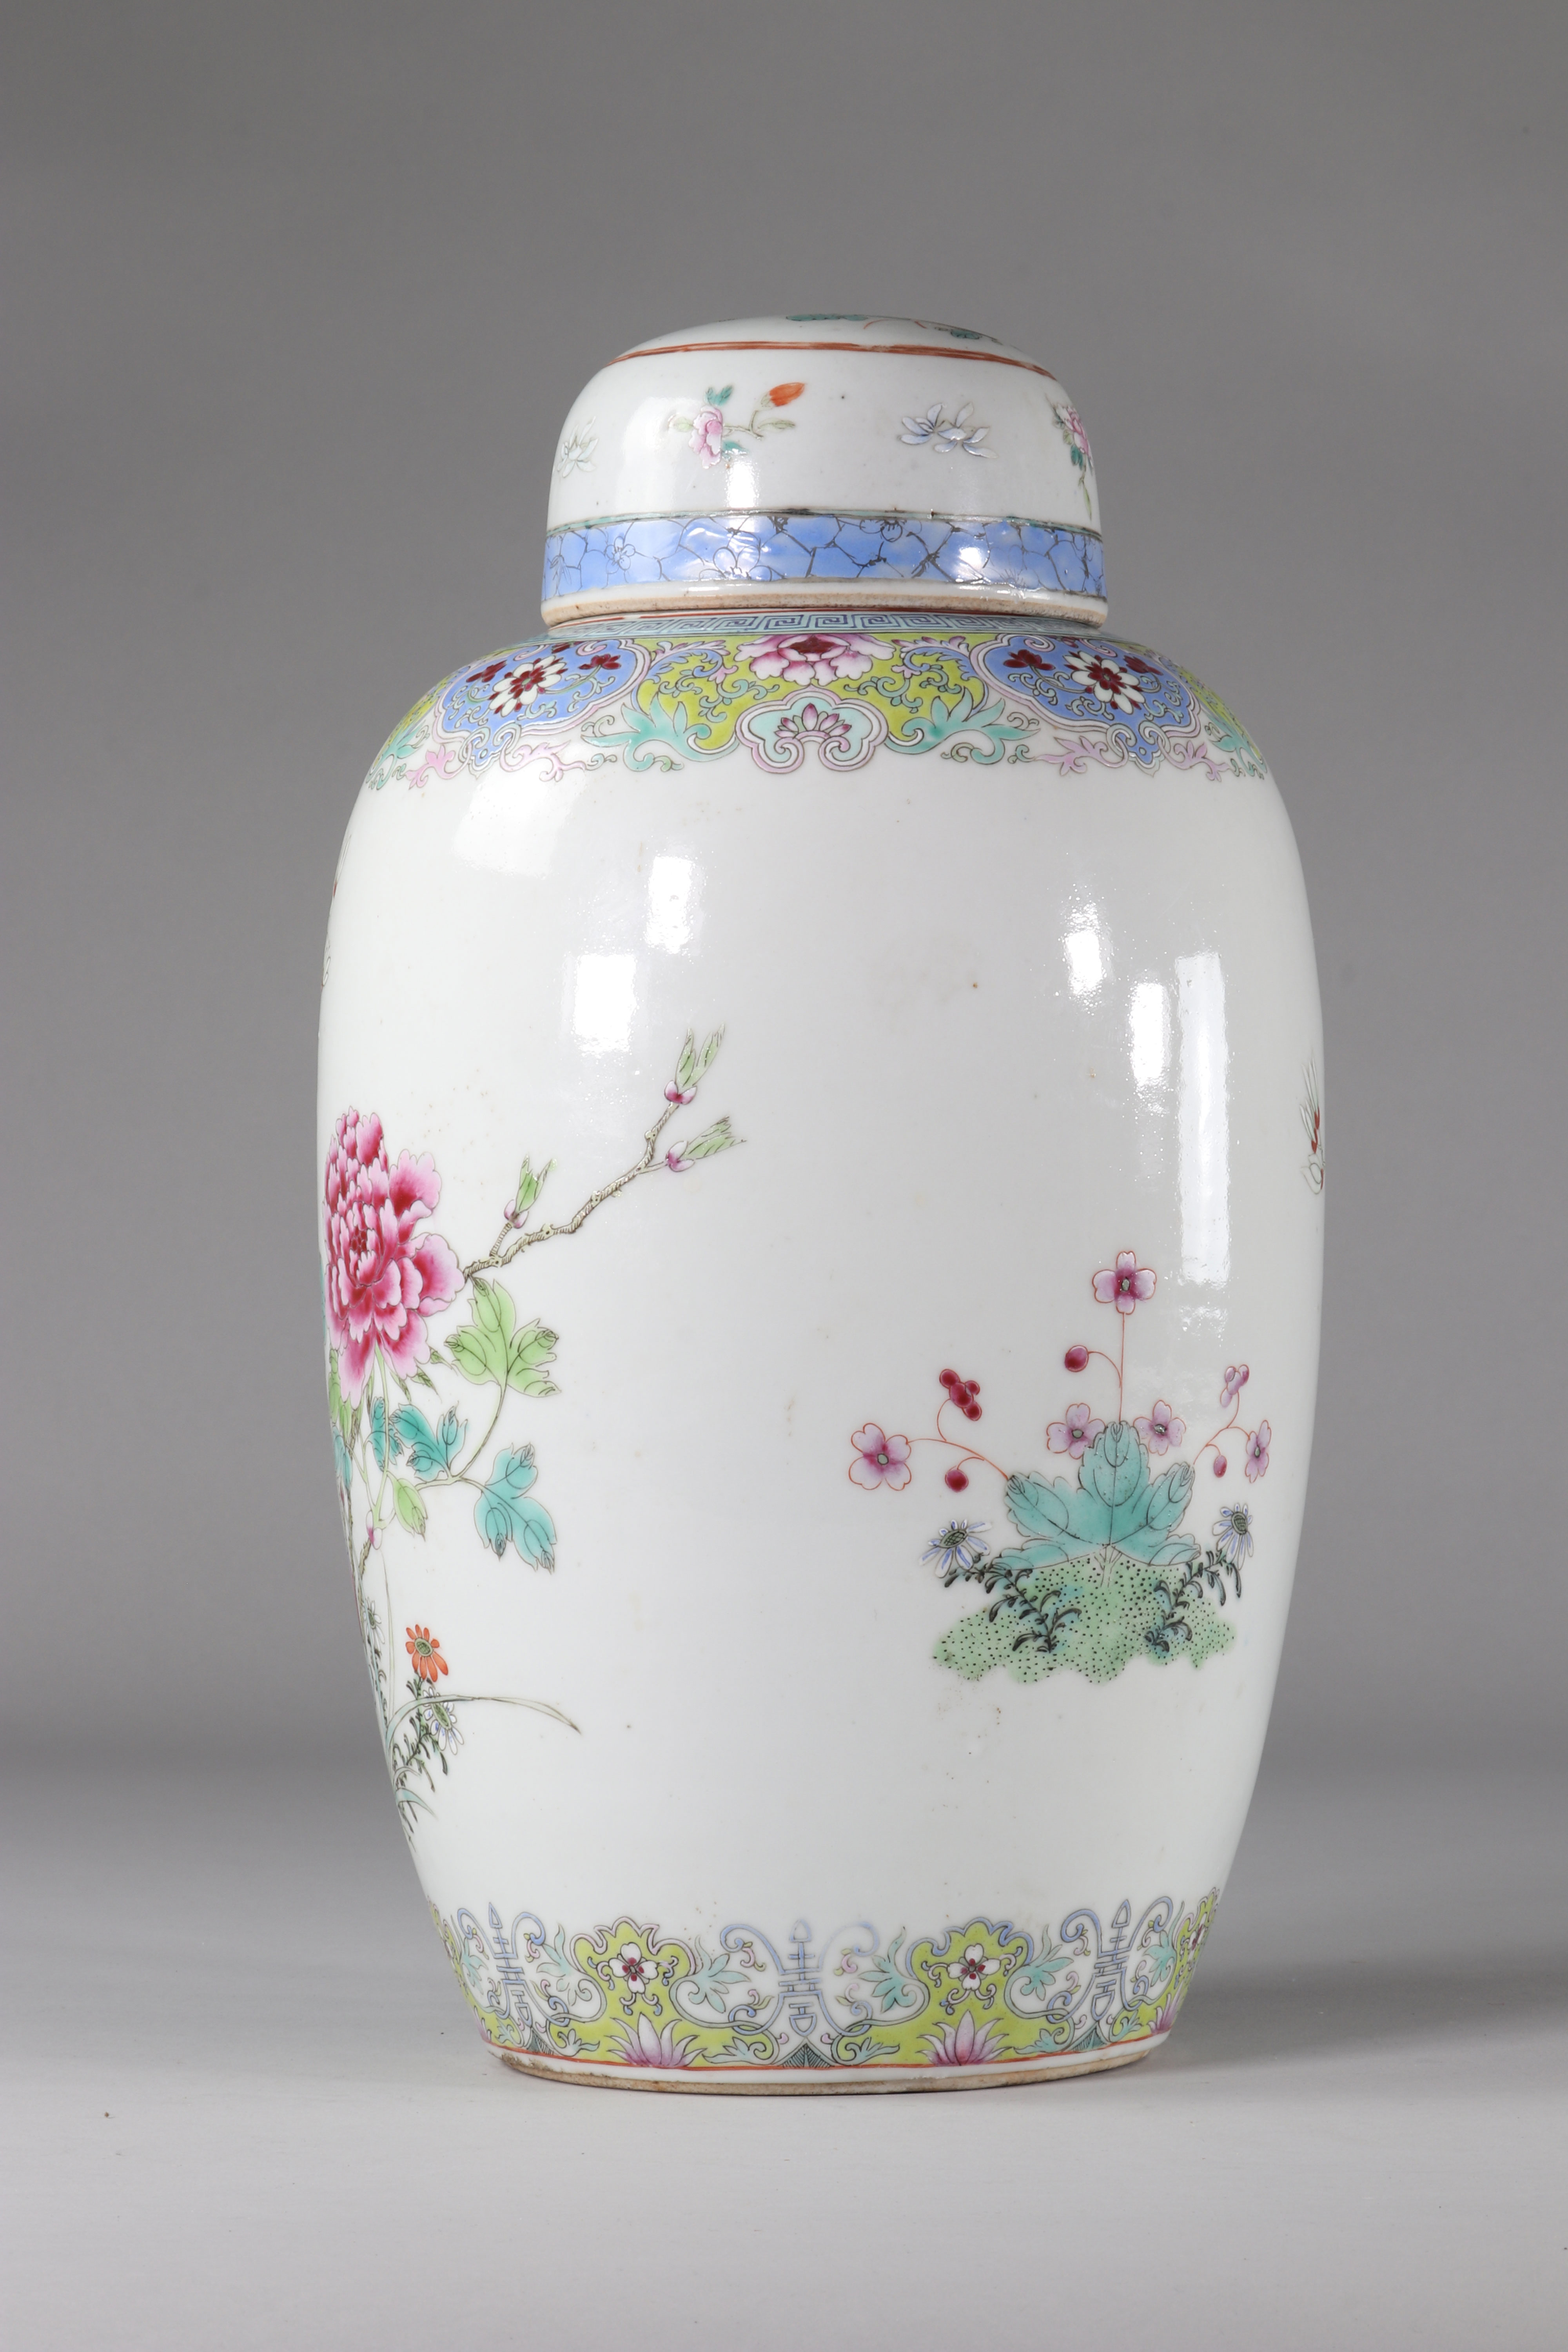 China famille rose porcelain vase decorated with birds and flowers Qing period - Image 3 of 7